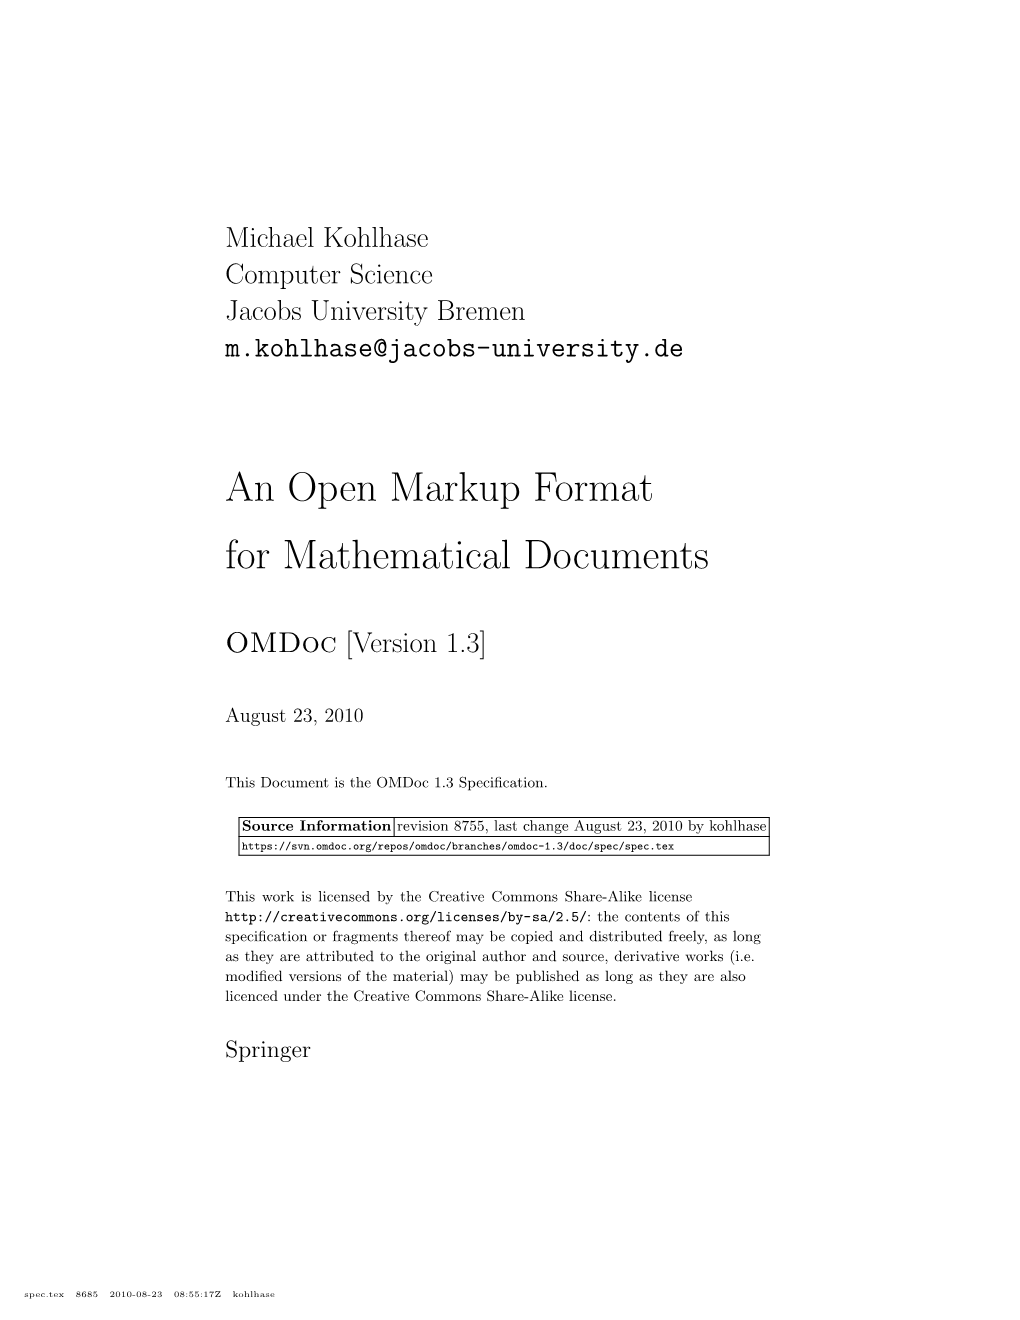 An Open Markup Format for Mathematical Documents